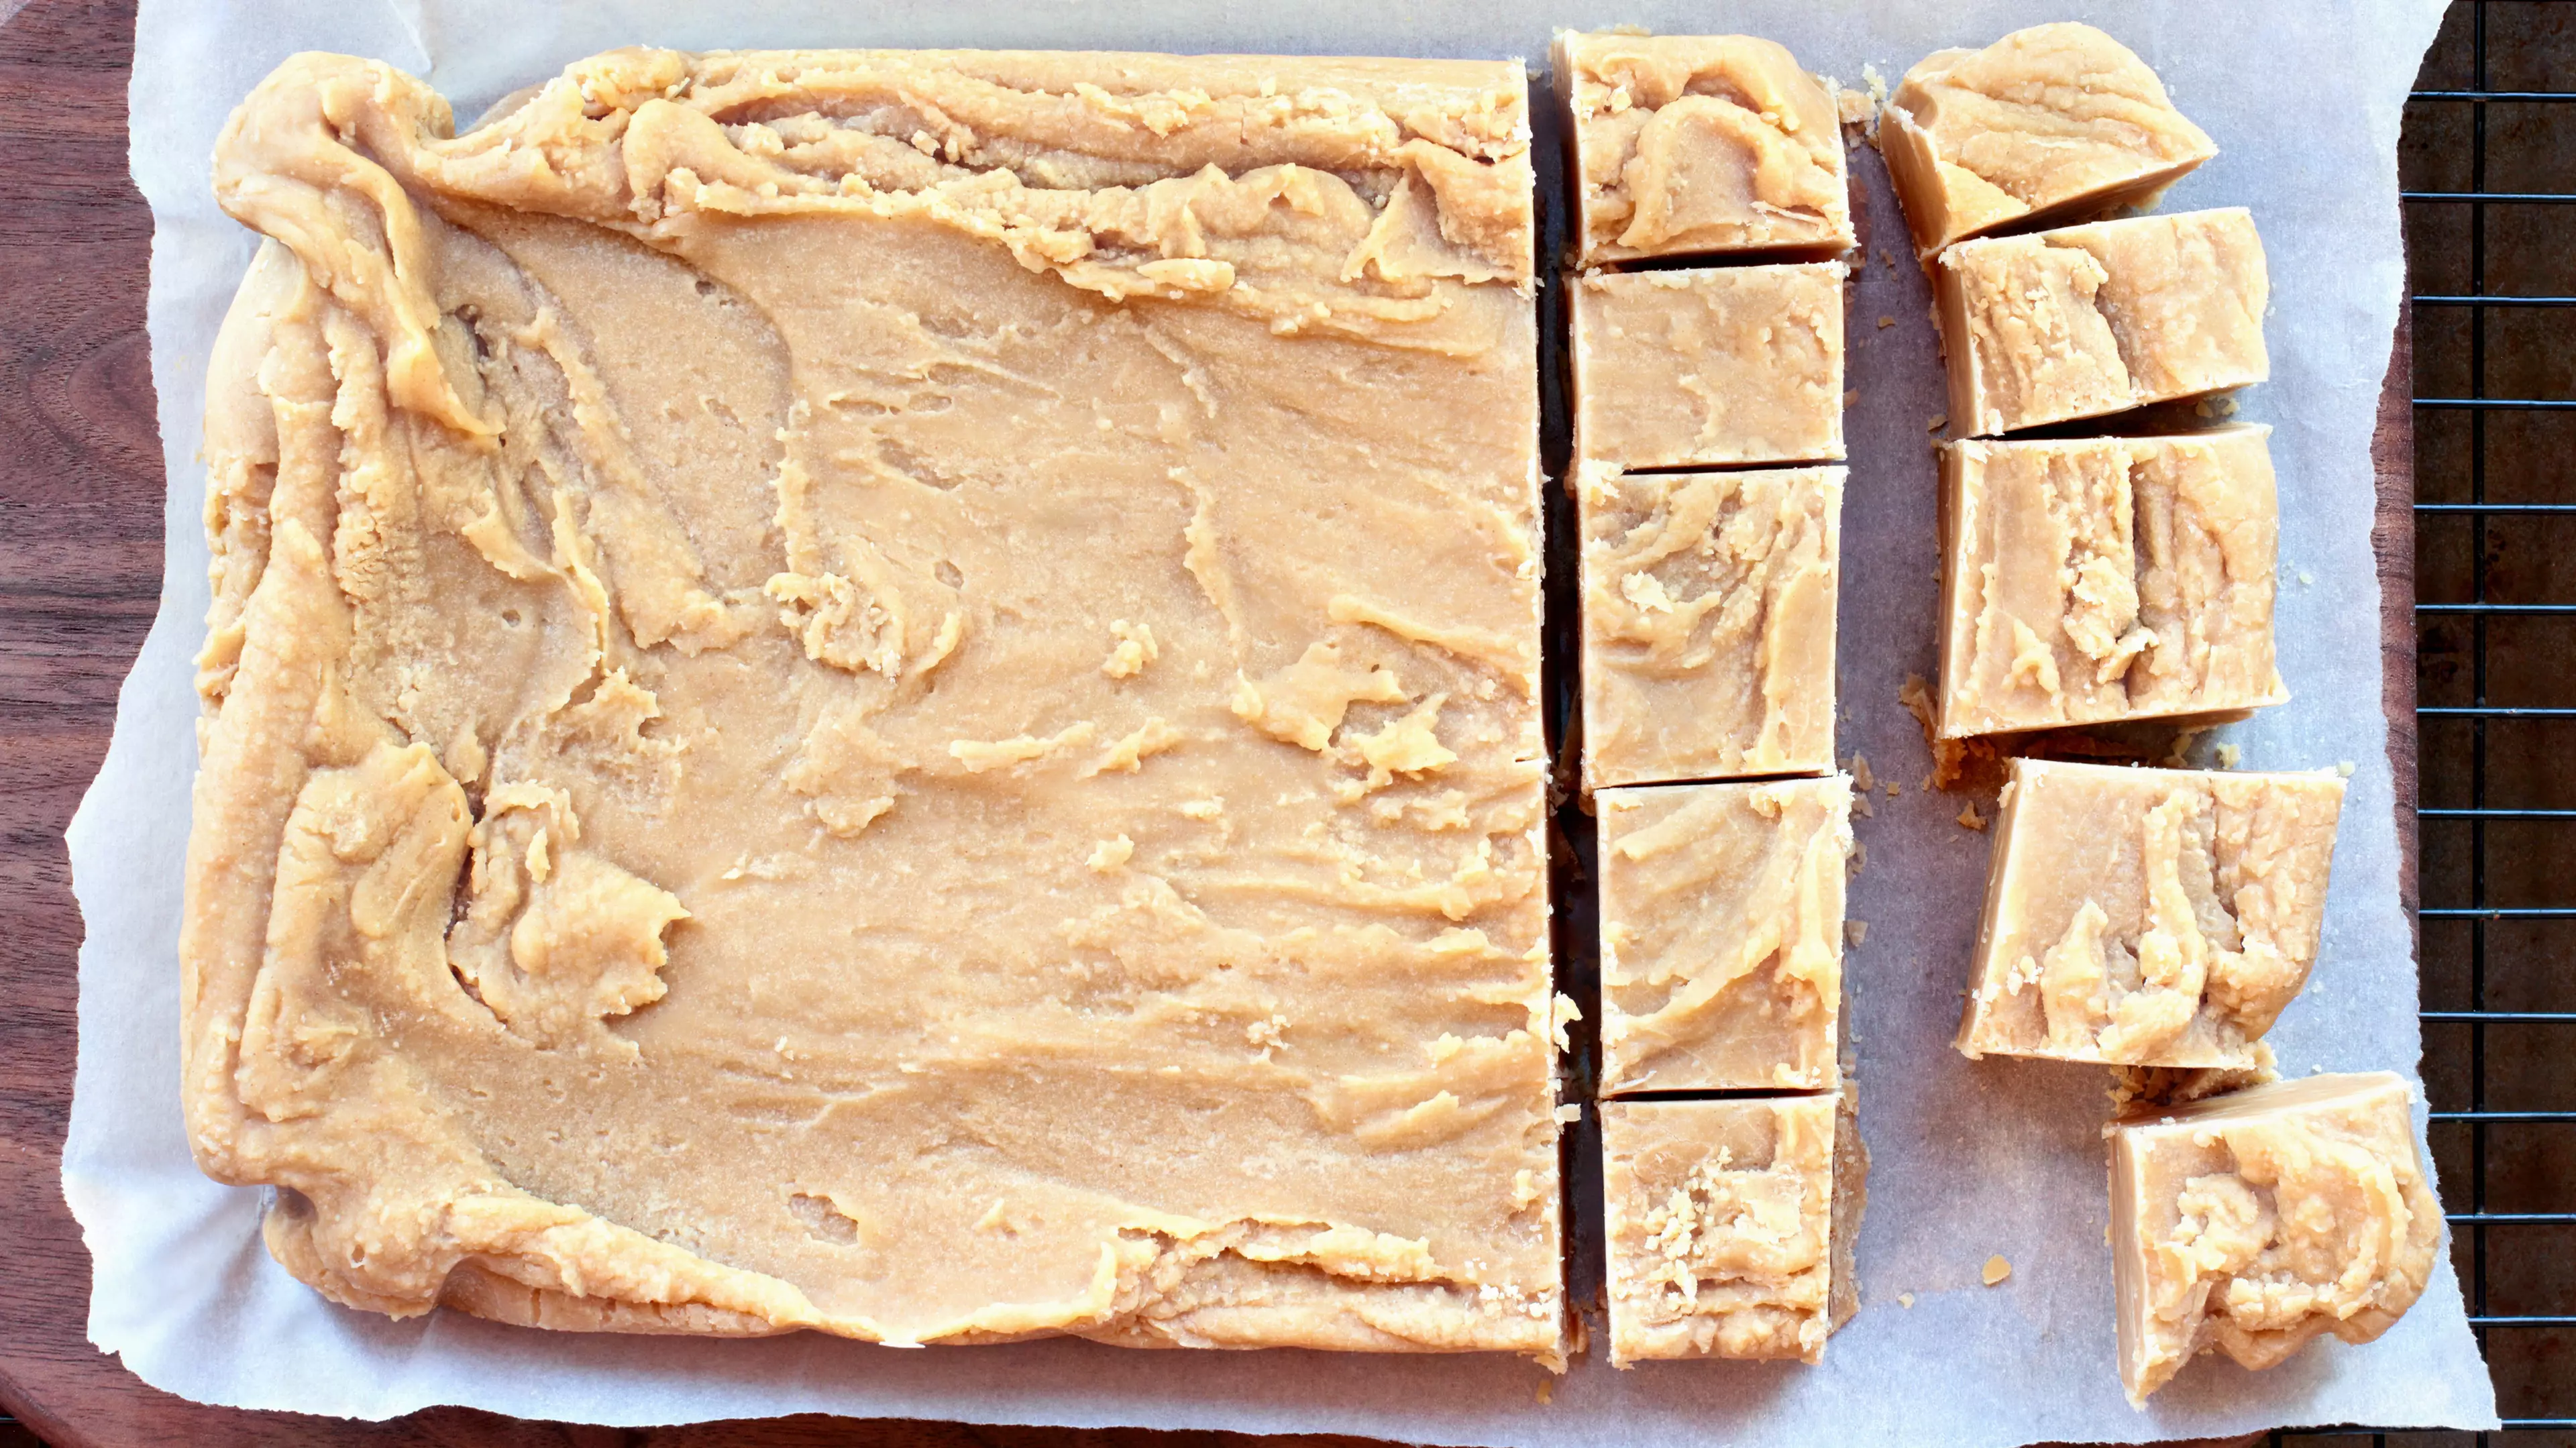 This Company Is Hiring A Professional Fudge Taste And We Want In